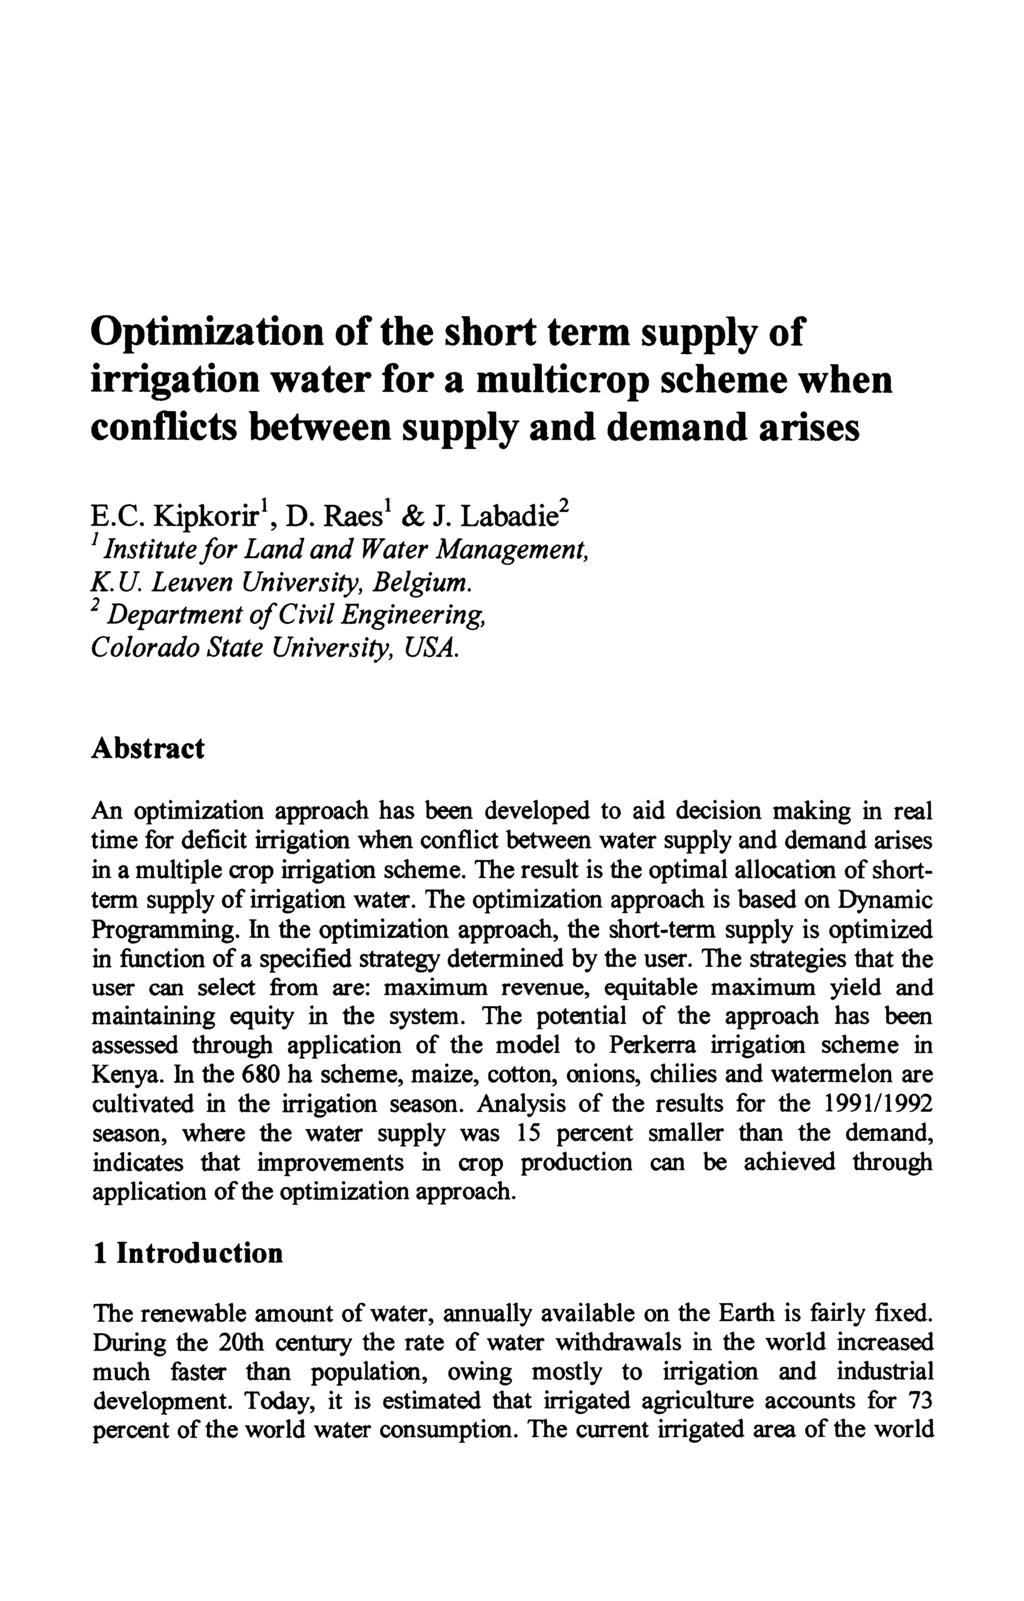 Optimization of the short term supply of irrigation water for a multicrop scheme when conflicts between supply and demand arises E.G. Kipkorir', D. Raes* & J.